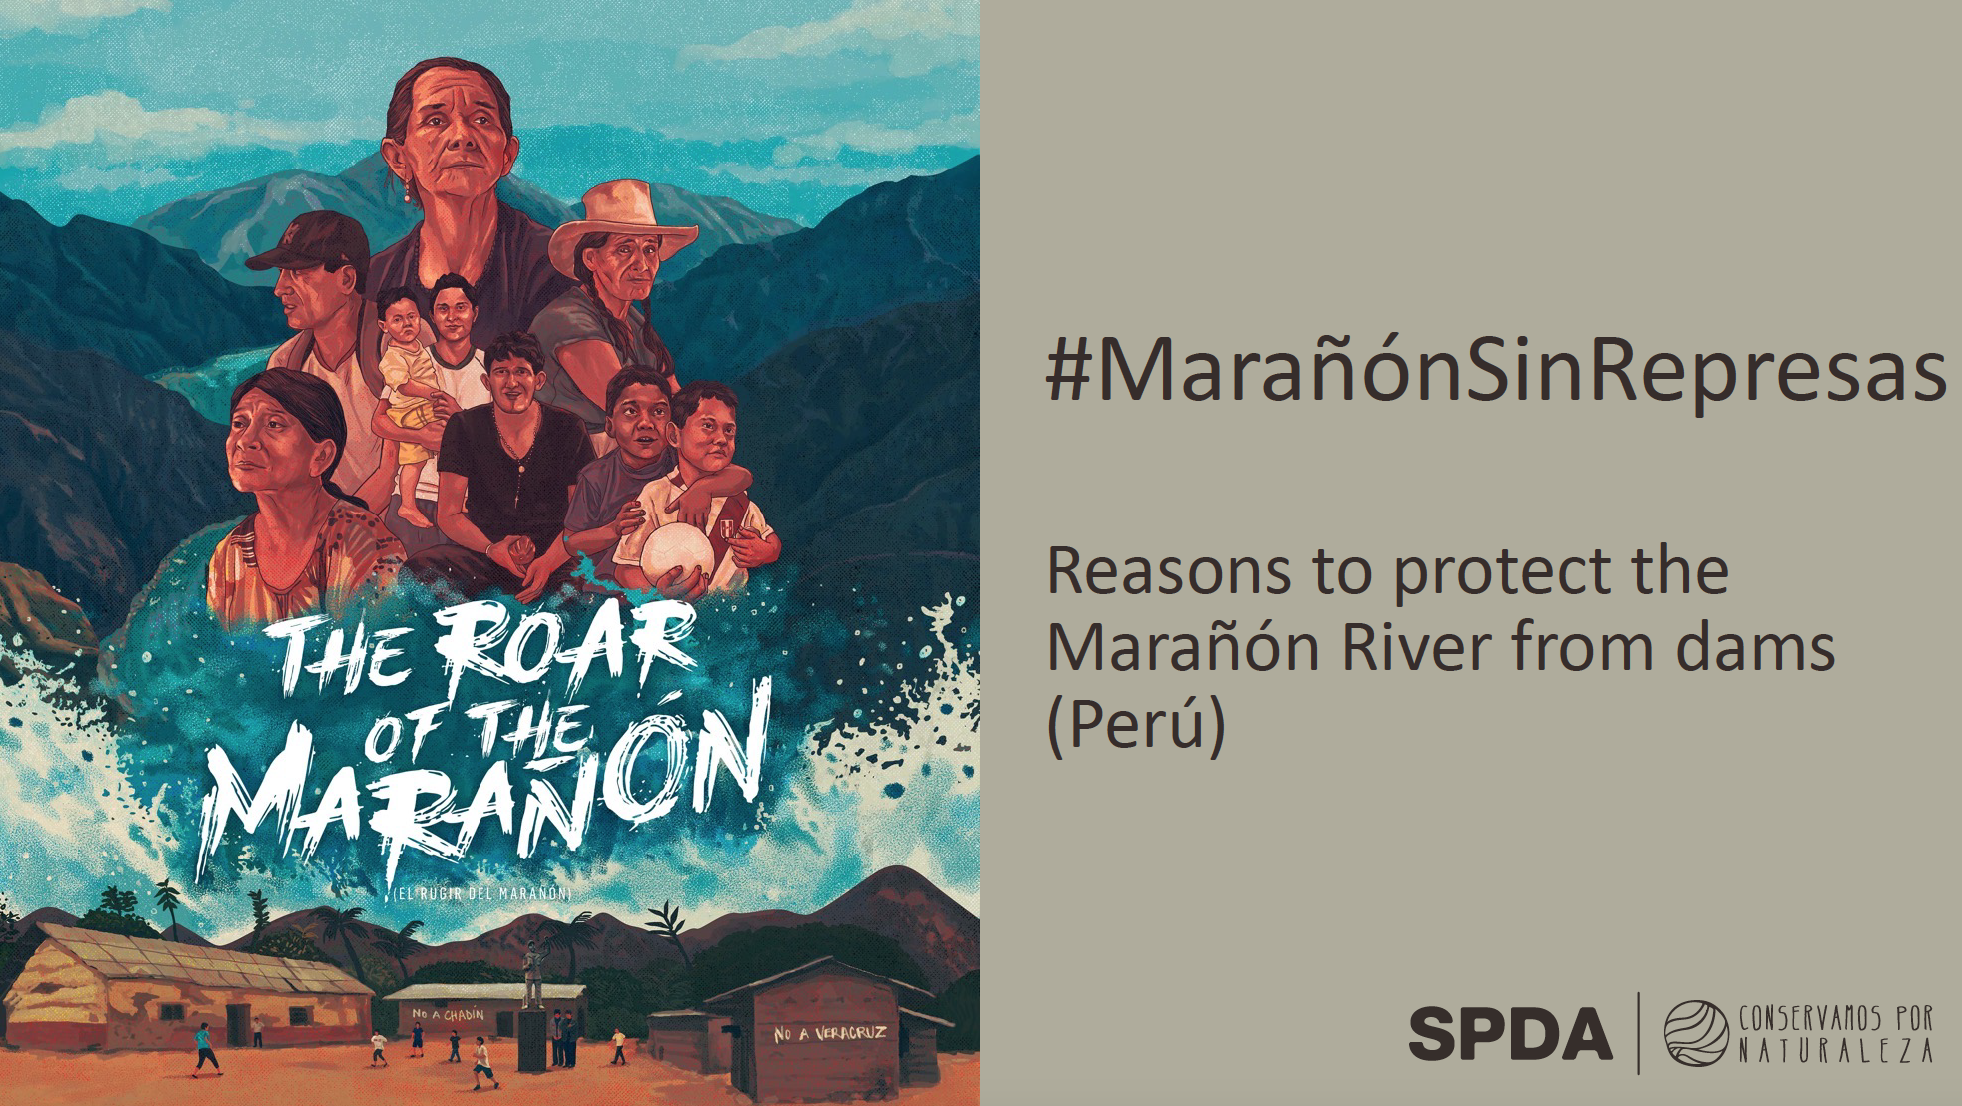 Update on Marañon Dams & Call To Action